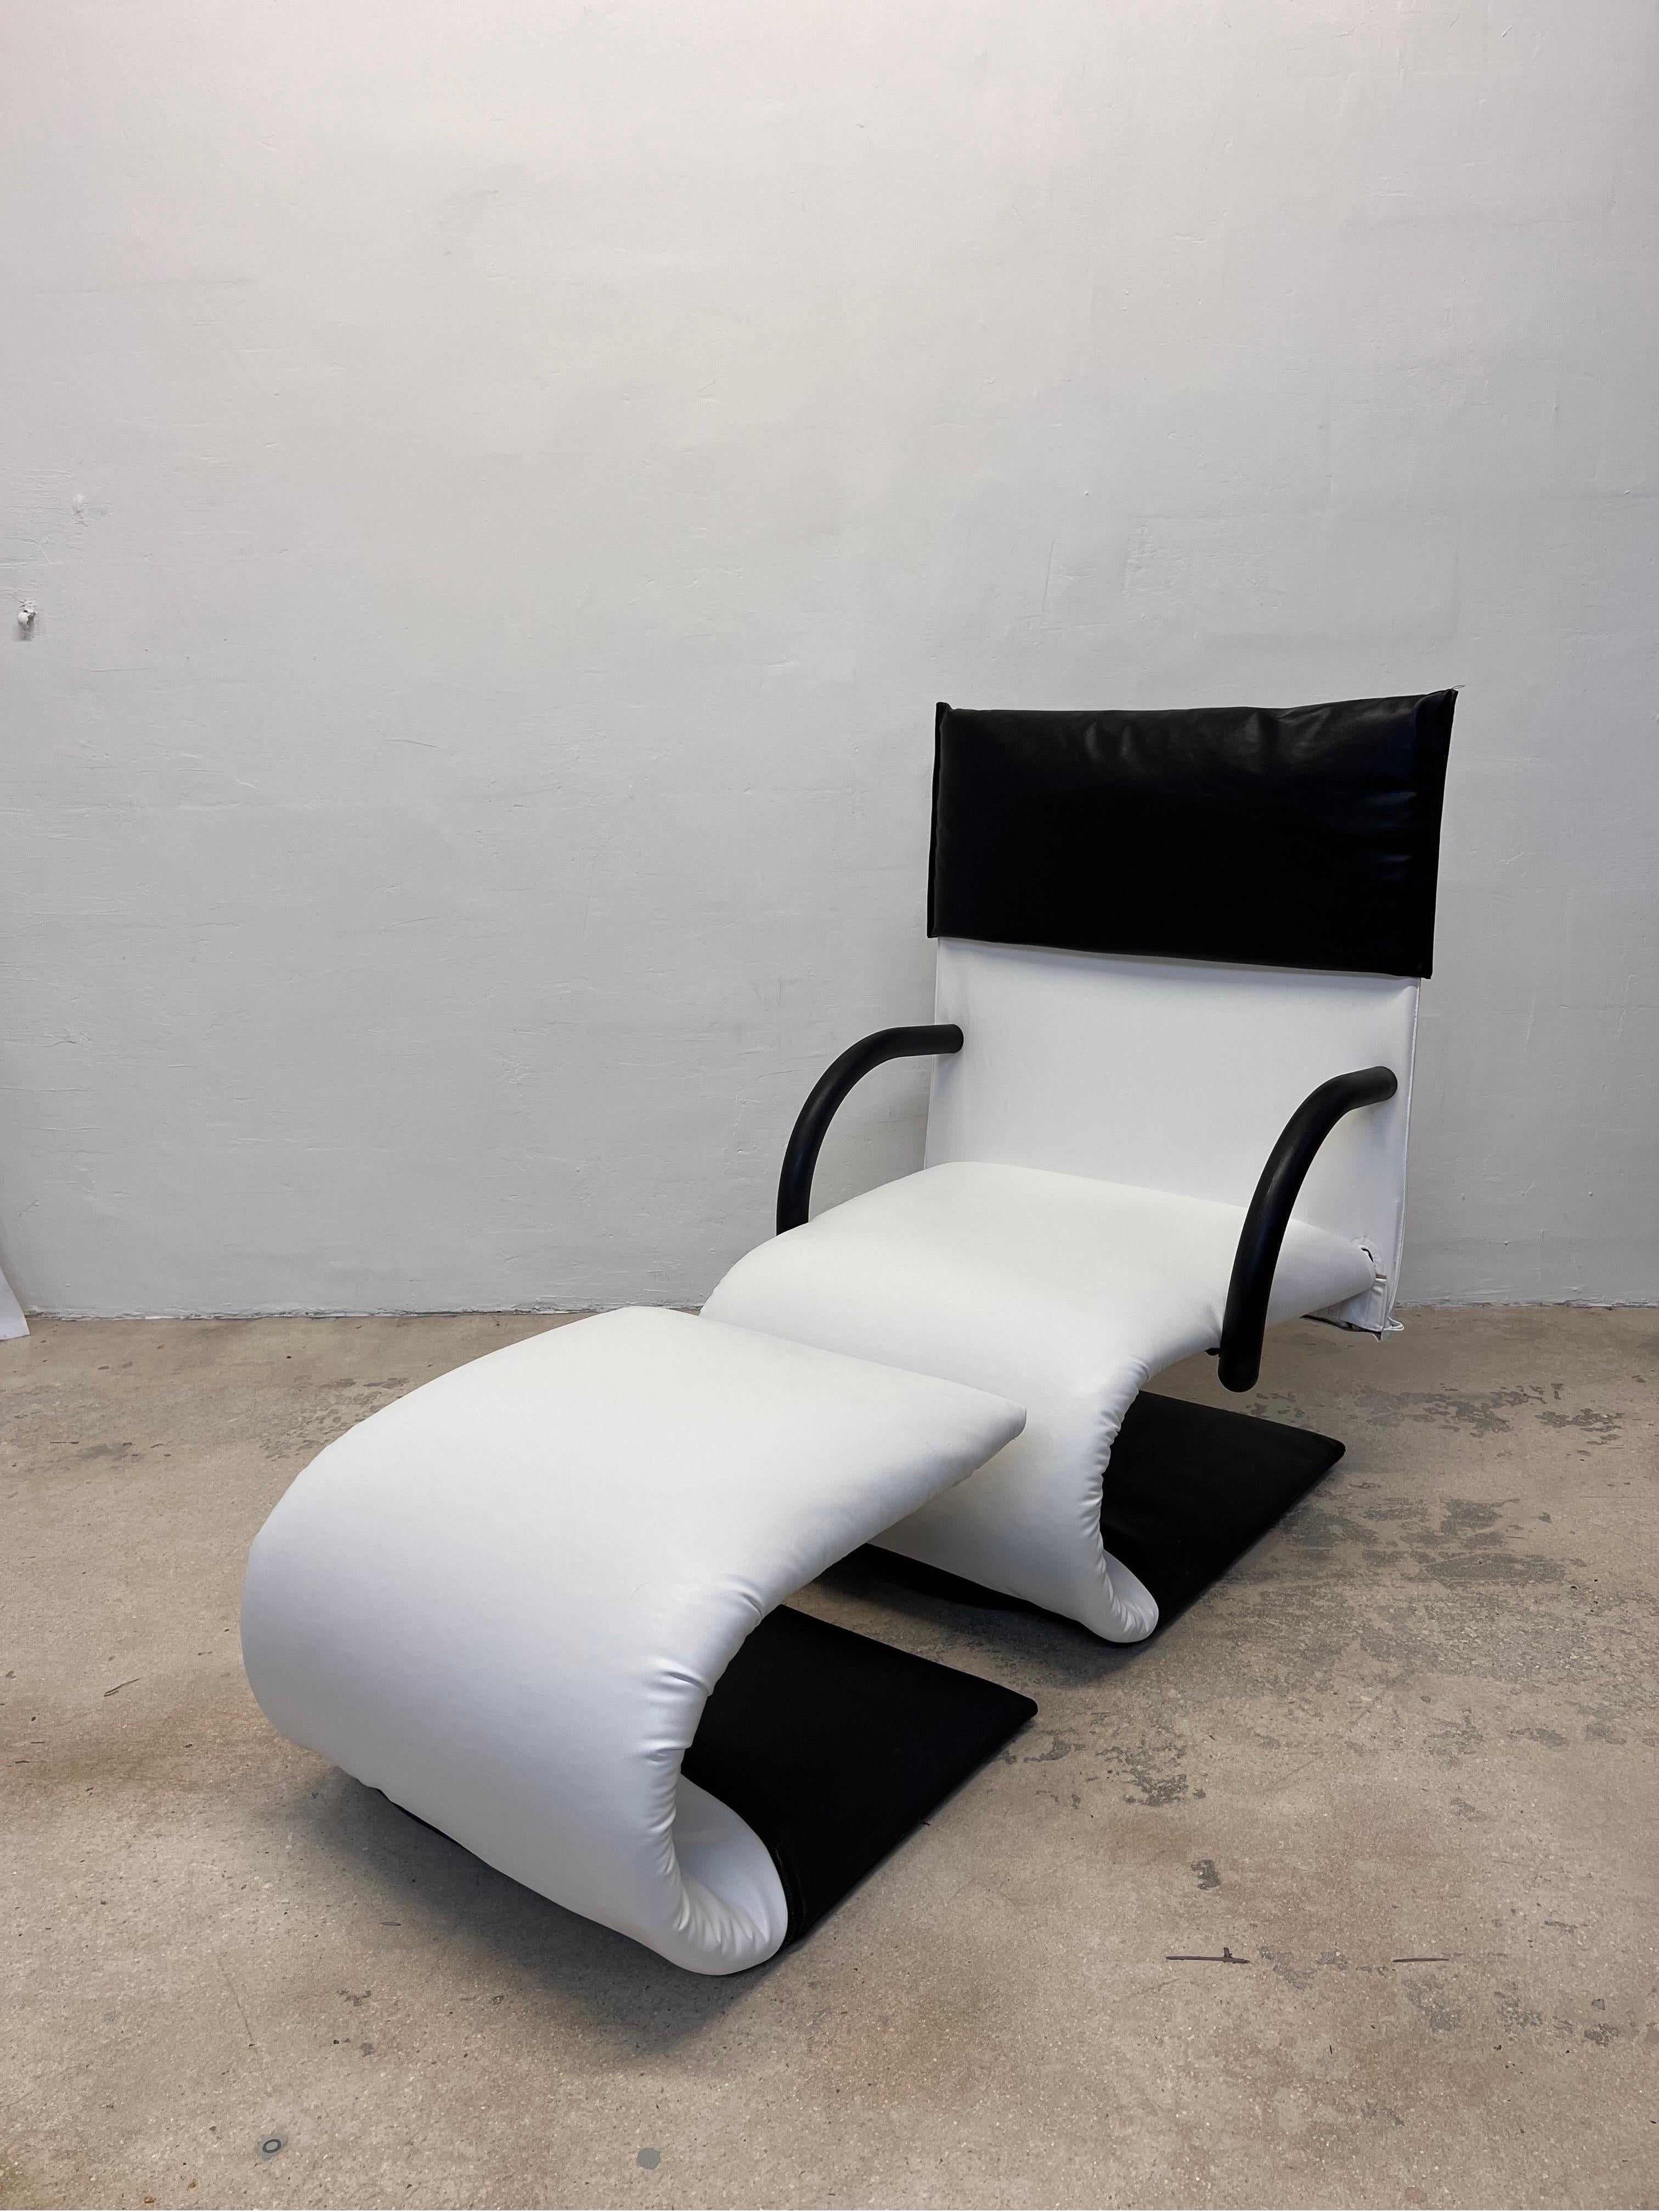 Postmodern Zen lounge chair and footrest by Claude Brisson for Ligne Roset, France 1980s. Rendered in black and white vegan leather upholstery with black removable headrest protector.

This set has been newly upholstered in vegan leather from